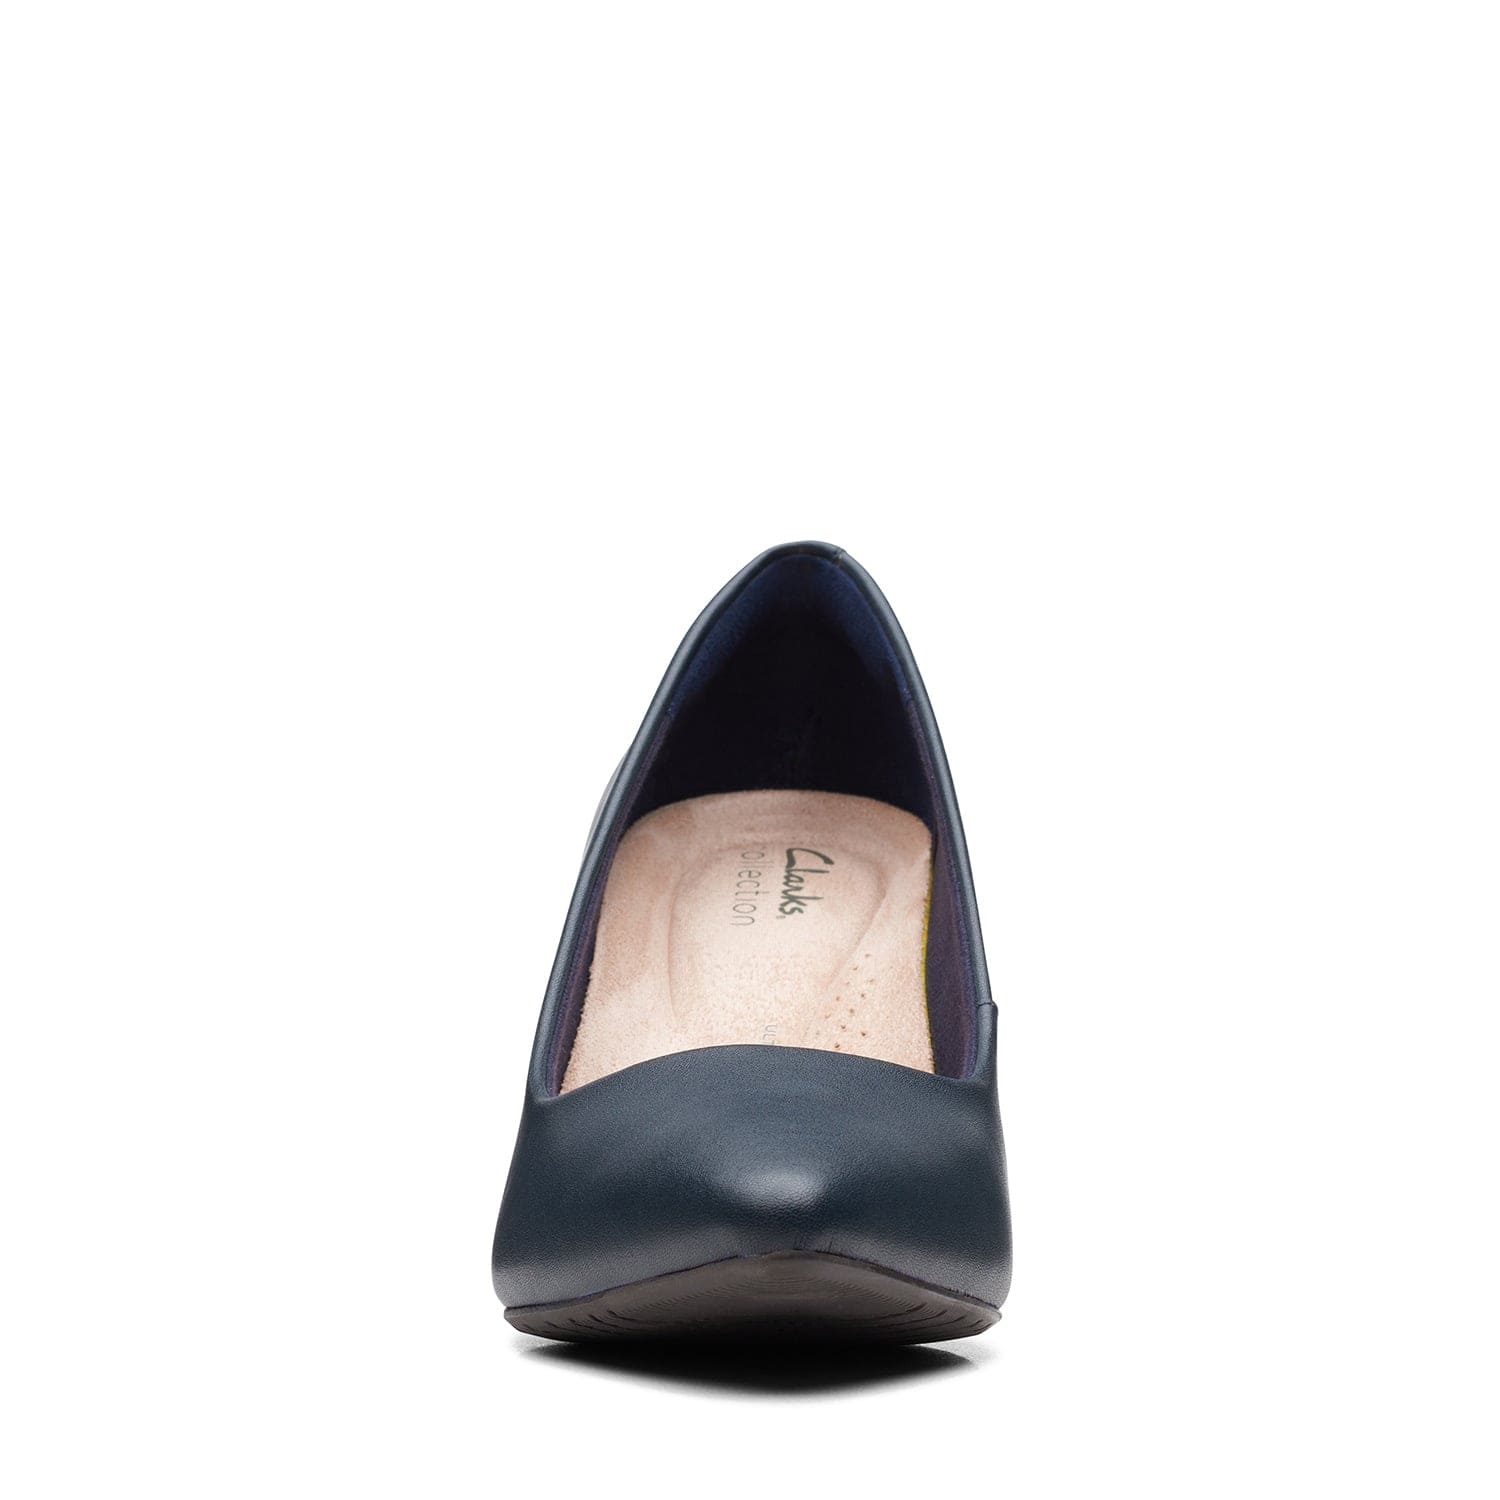 Clarks Kataleyna Gem - Shoes - Navy Leather - 261712225 - E Width (Wide Fit)